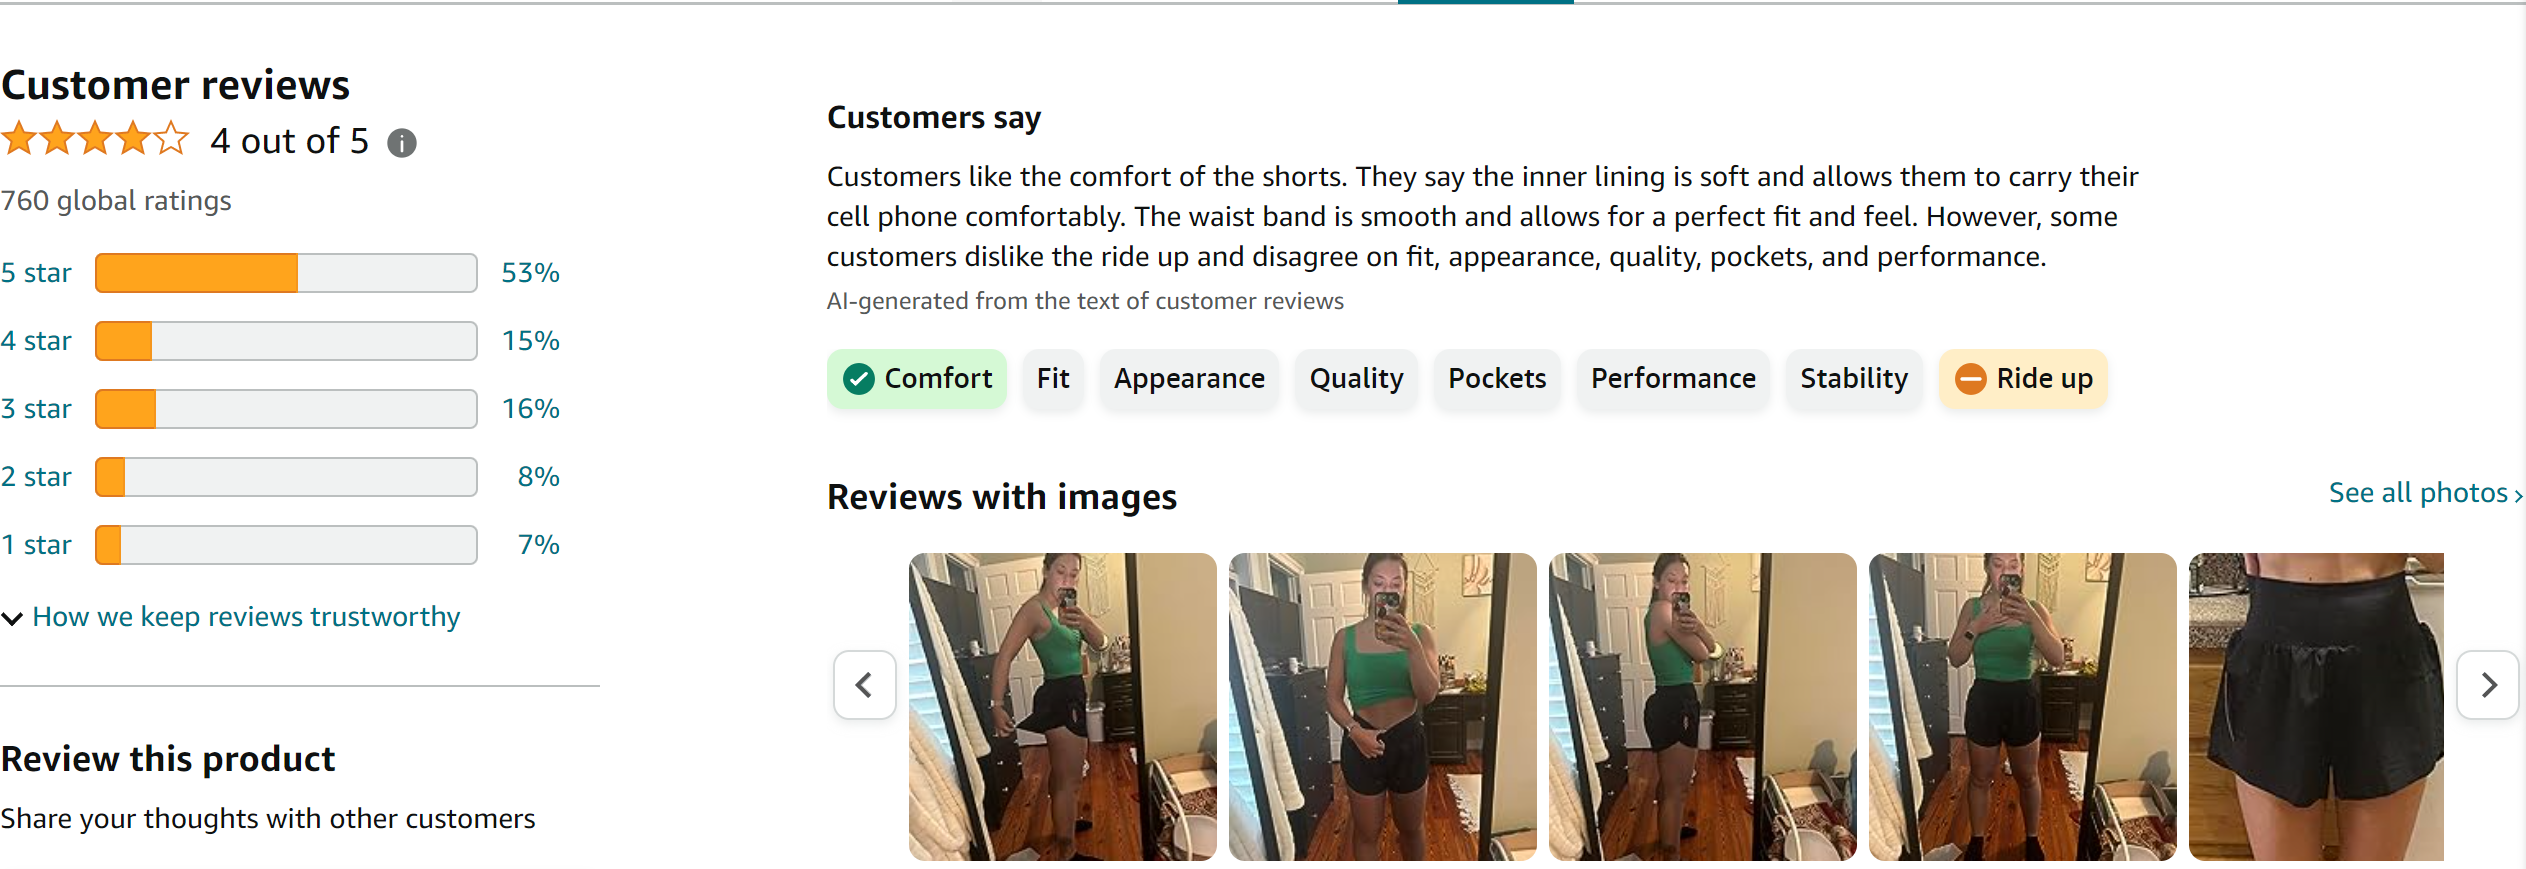 THE GYM PEOPLE Women’s Quick Dry Running Shorts Mesh Liner High Waisted Tennis Workout Shorts Zipper Pockets from Amazon Reviews (screenshot taken on 2024-2-23)